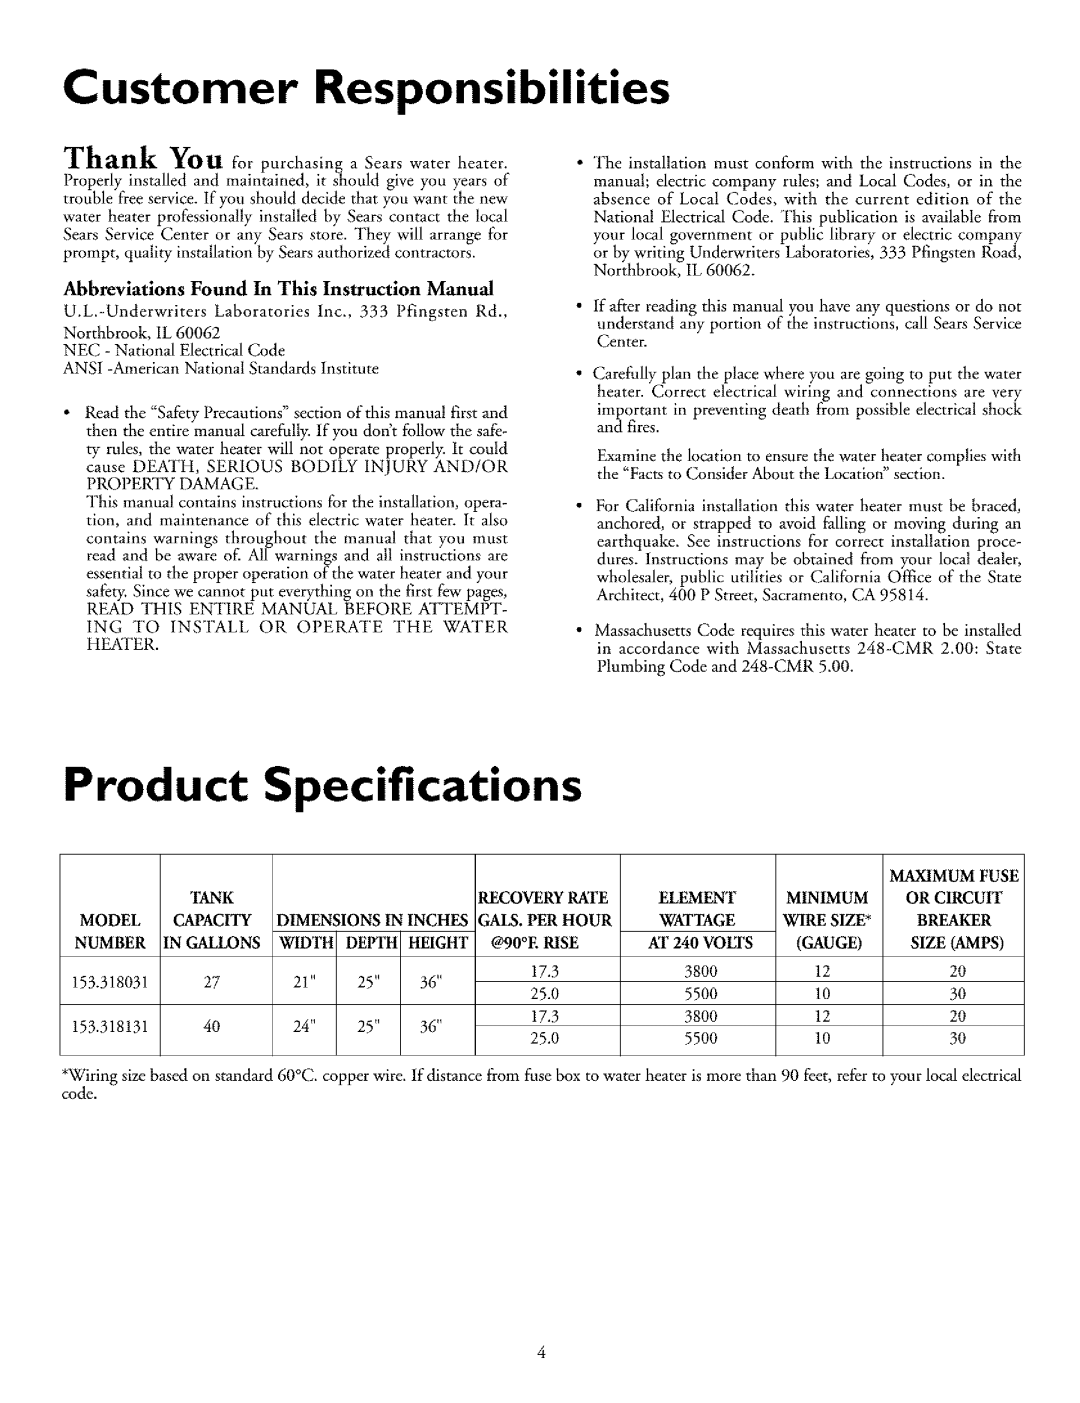 Kenmore 153.318131, 153.318031 owner manual Product, Specifications, Customer Responsibilities 